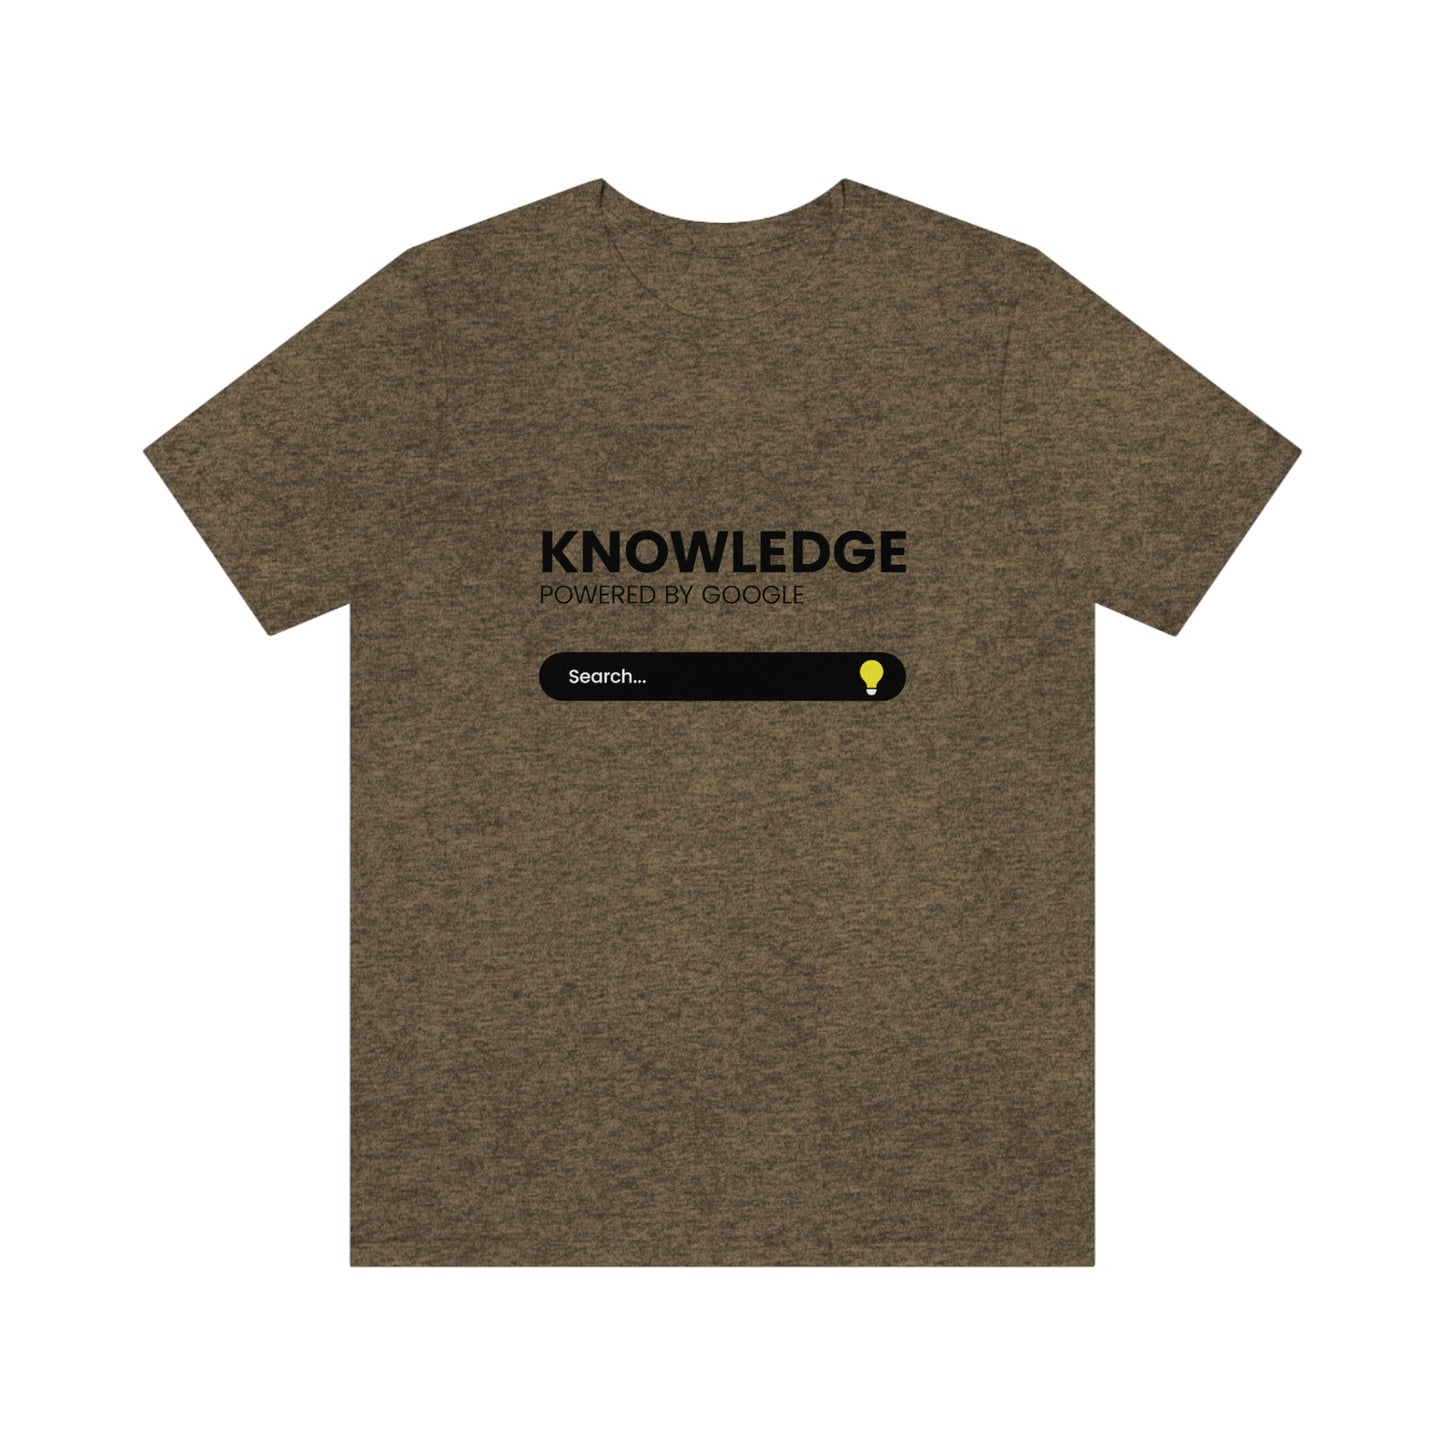 Knowledge, powered by Google - Funny Tech - Unisex Short Sleeve Tee - CrazyTomTShirts